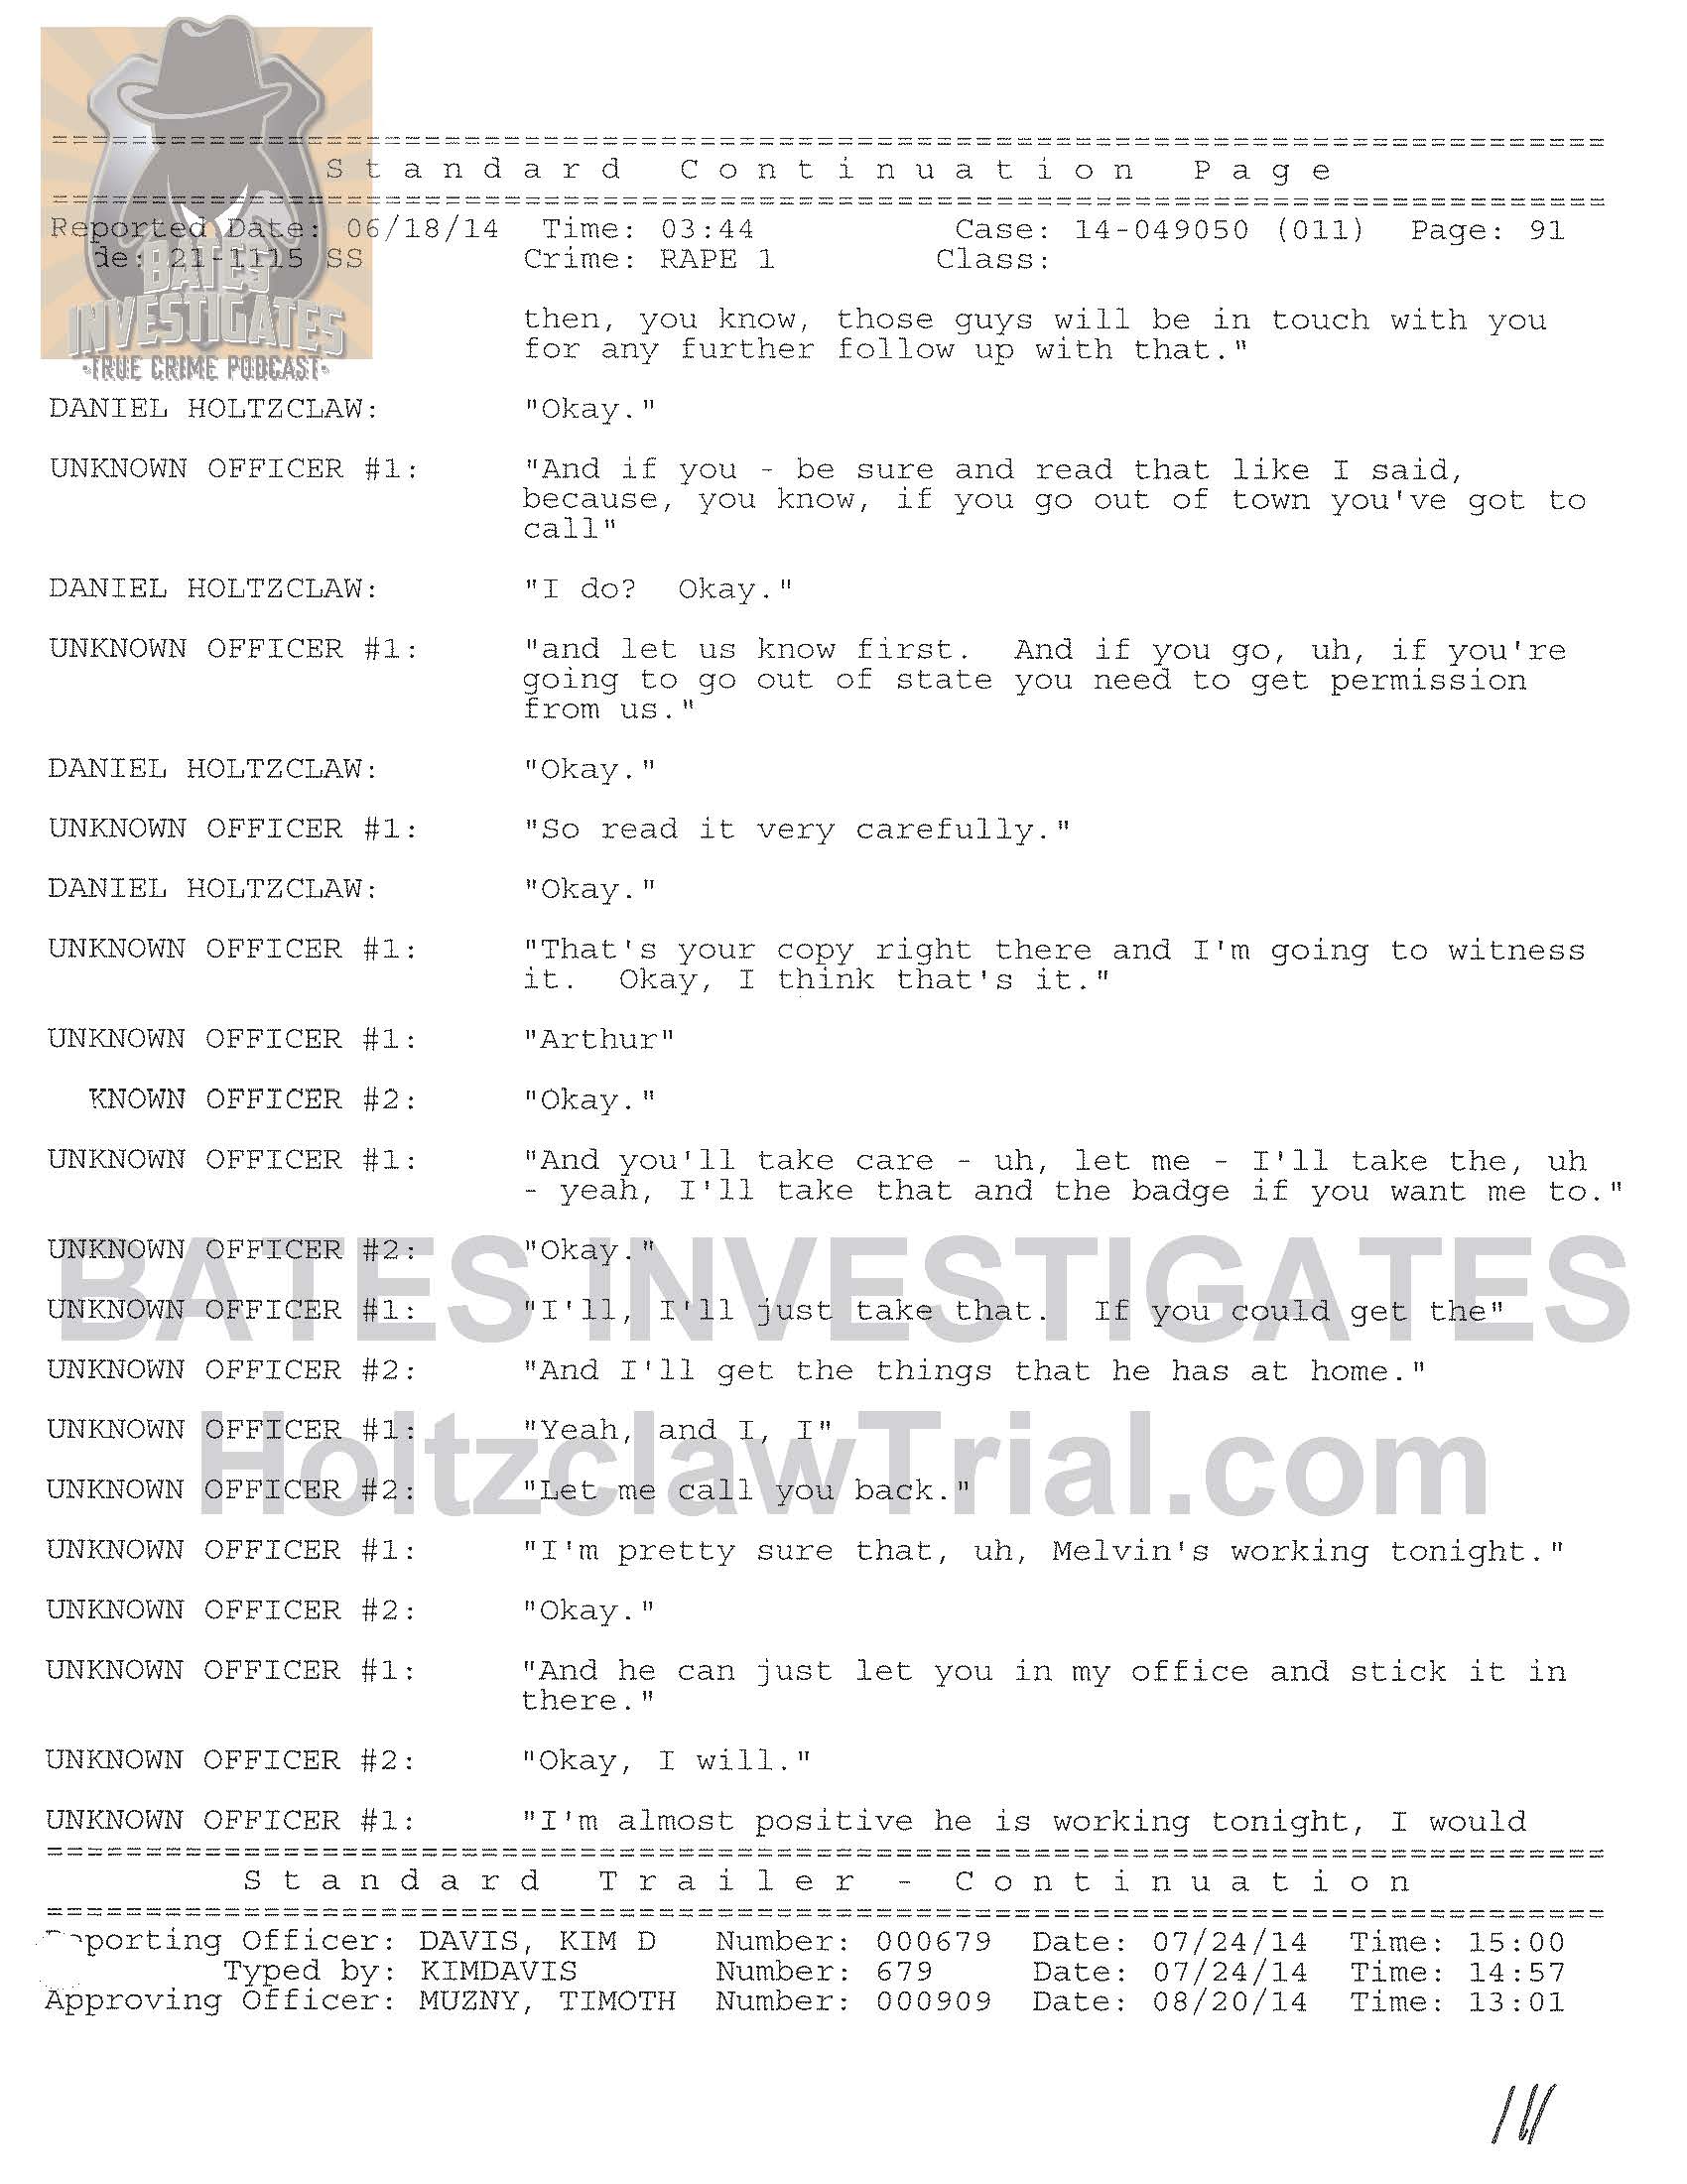 Holtzclaw Interrogation Transcript - Ep02 Redacted_Page_91.jpg